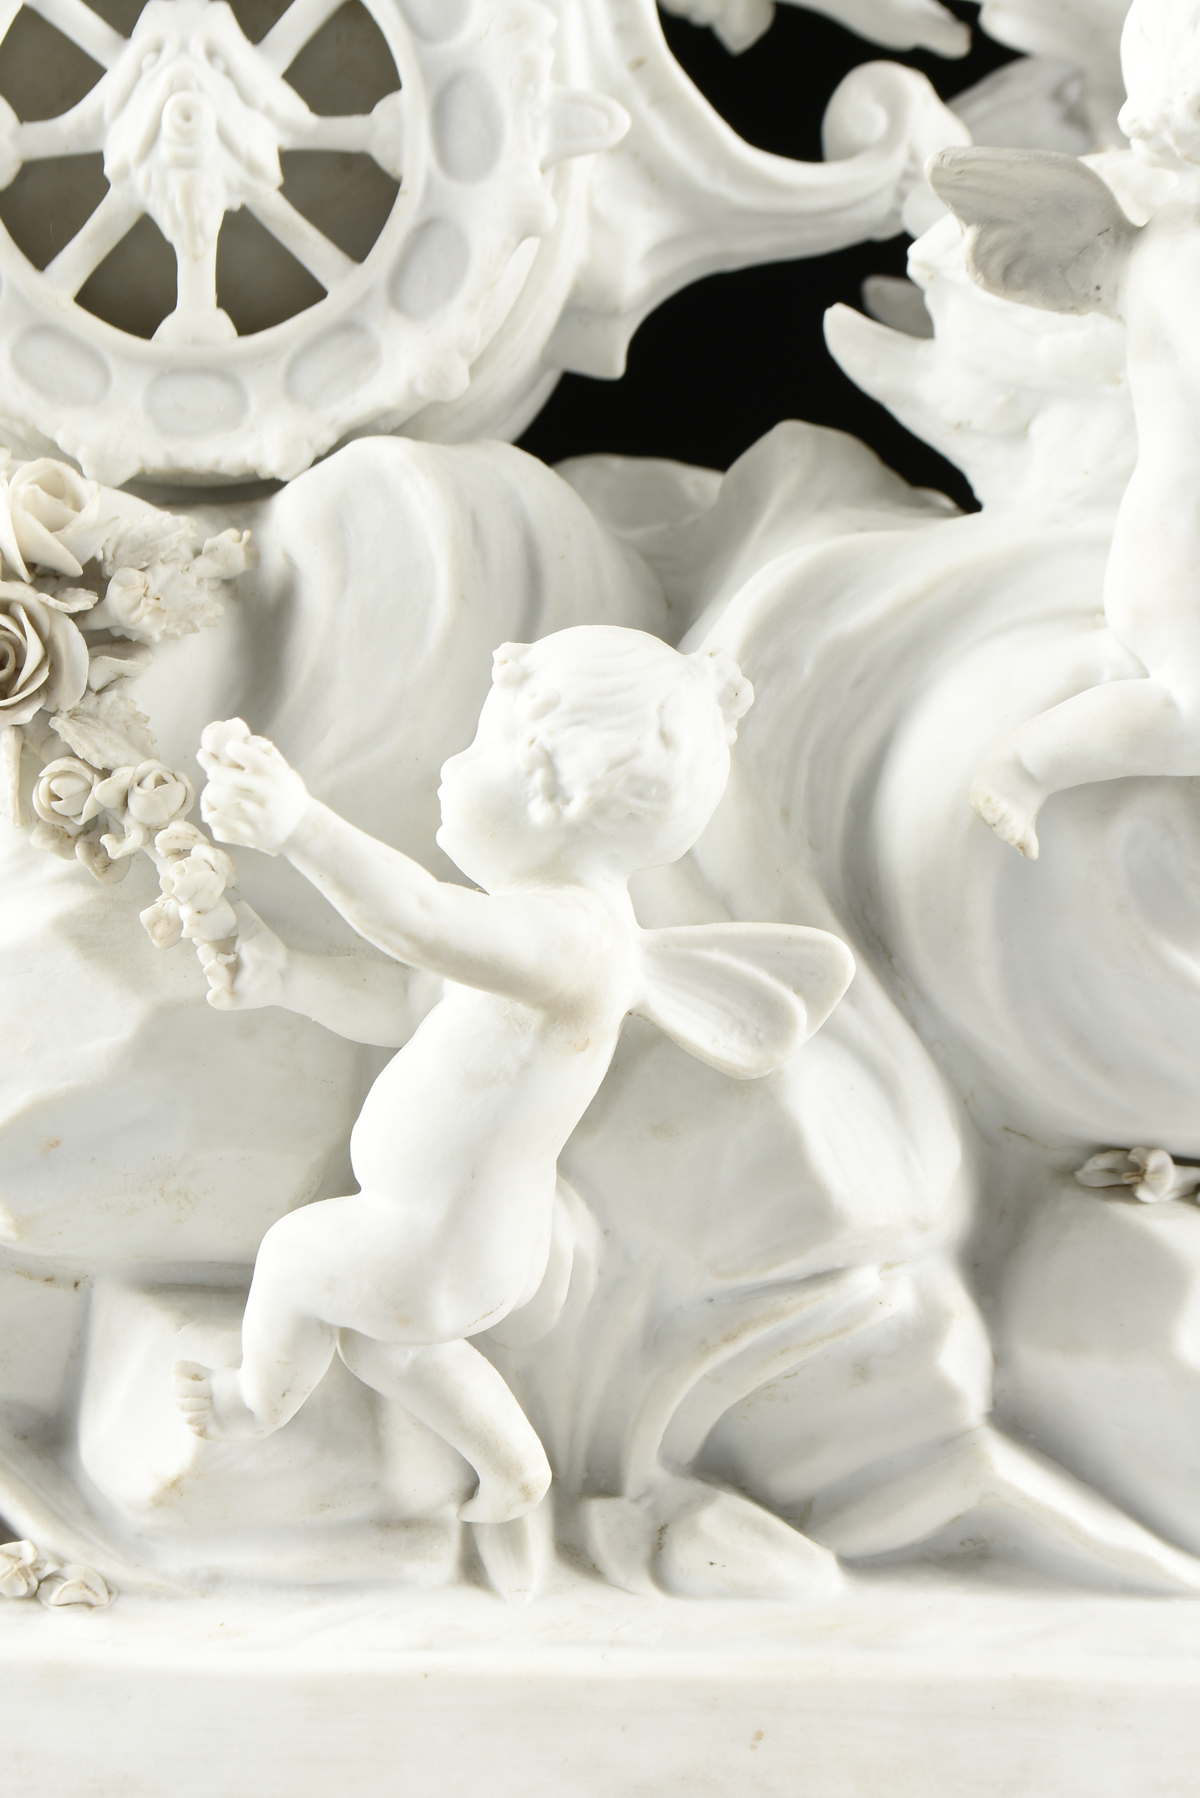 A BAROQUE REVIVAL BISQUE PORCELAIN FIGURAL GROUPING, "Allegory of Spring," POSSIBLY GERMAN, LATE - Image 4 of 11